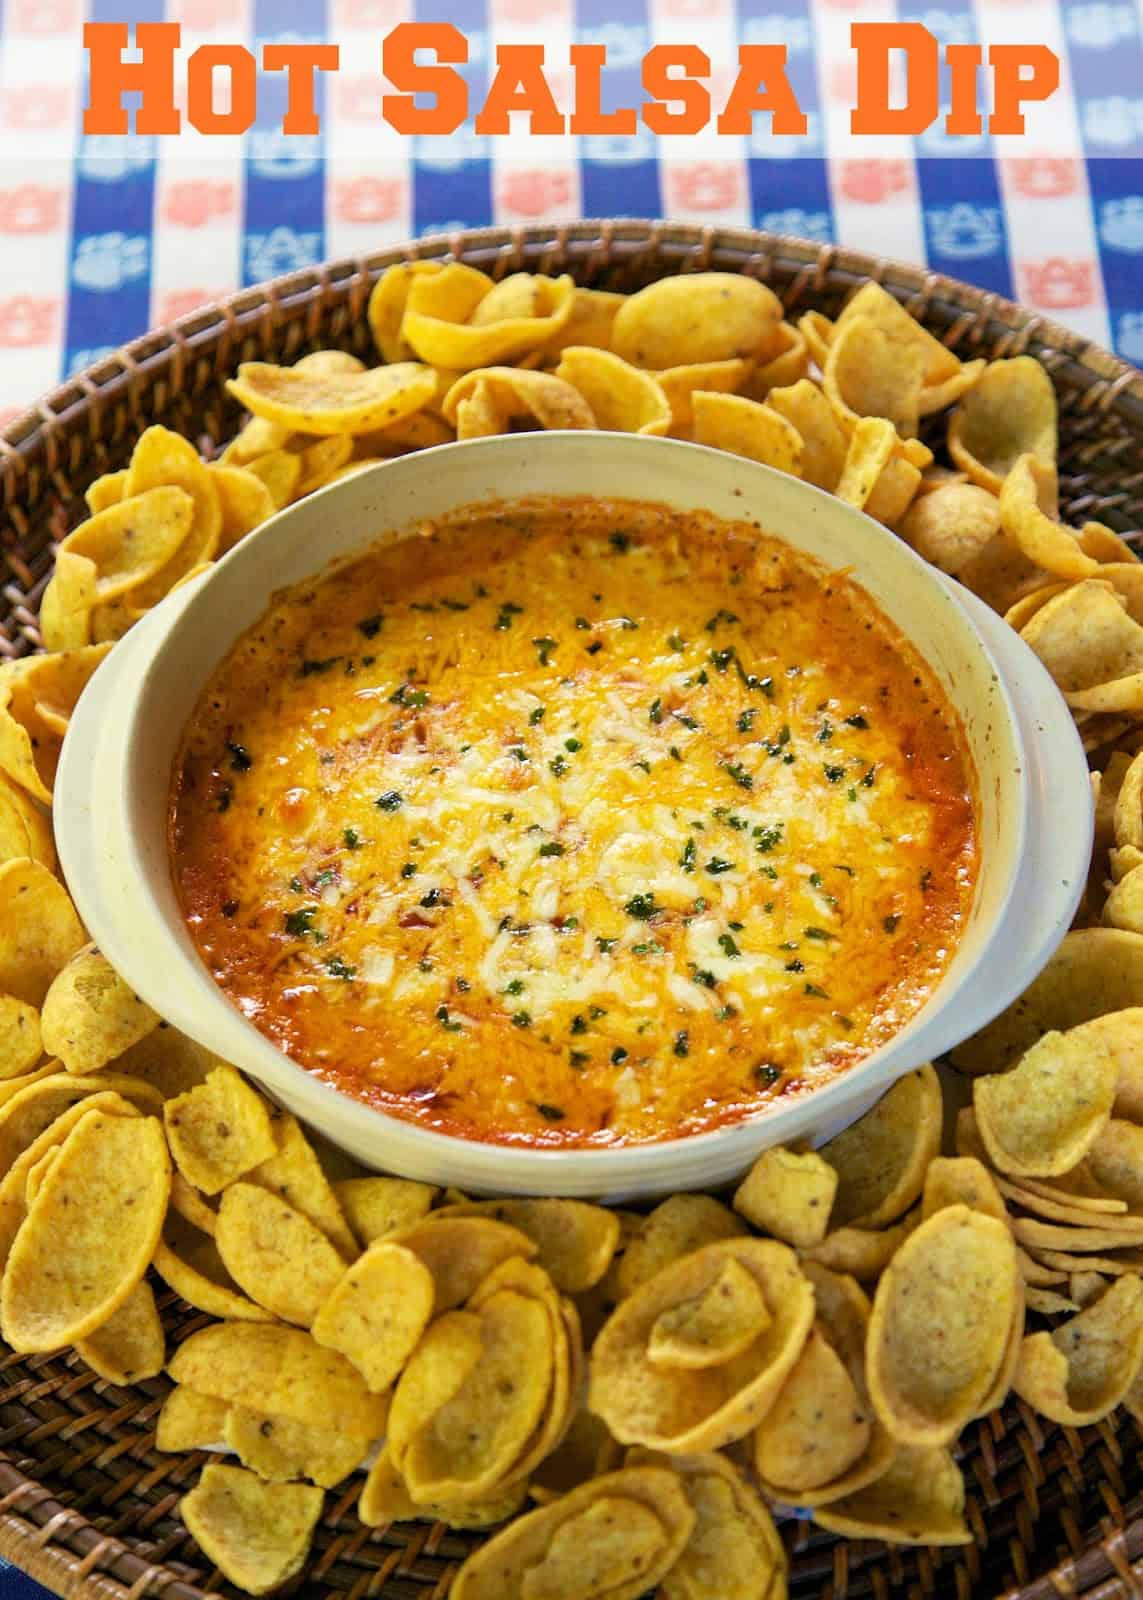 Hot Salsa Dip - only 4 ingredients! This stuff is AMAZING!!!! Cream cheese, taco seasoning, cheddar cheese and salsa. There are never any leftovers when I take this to a party! Make ahead of time and bake when ready to serve. Easy and delicious Mexican dip!!